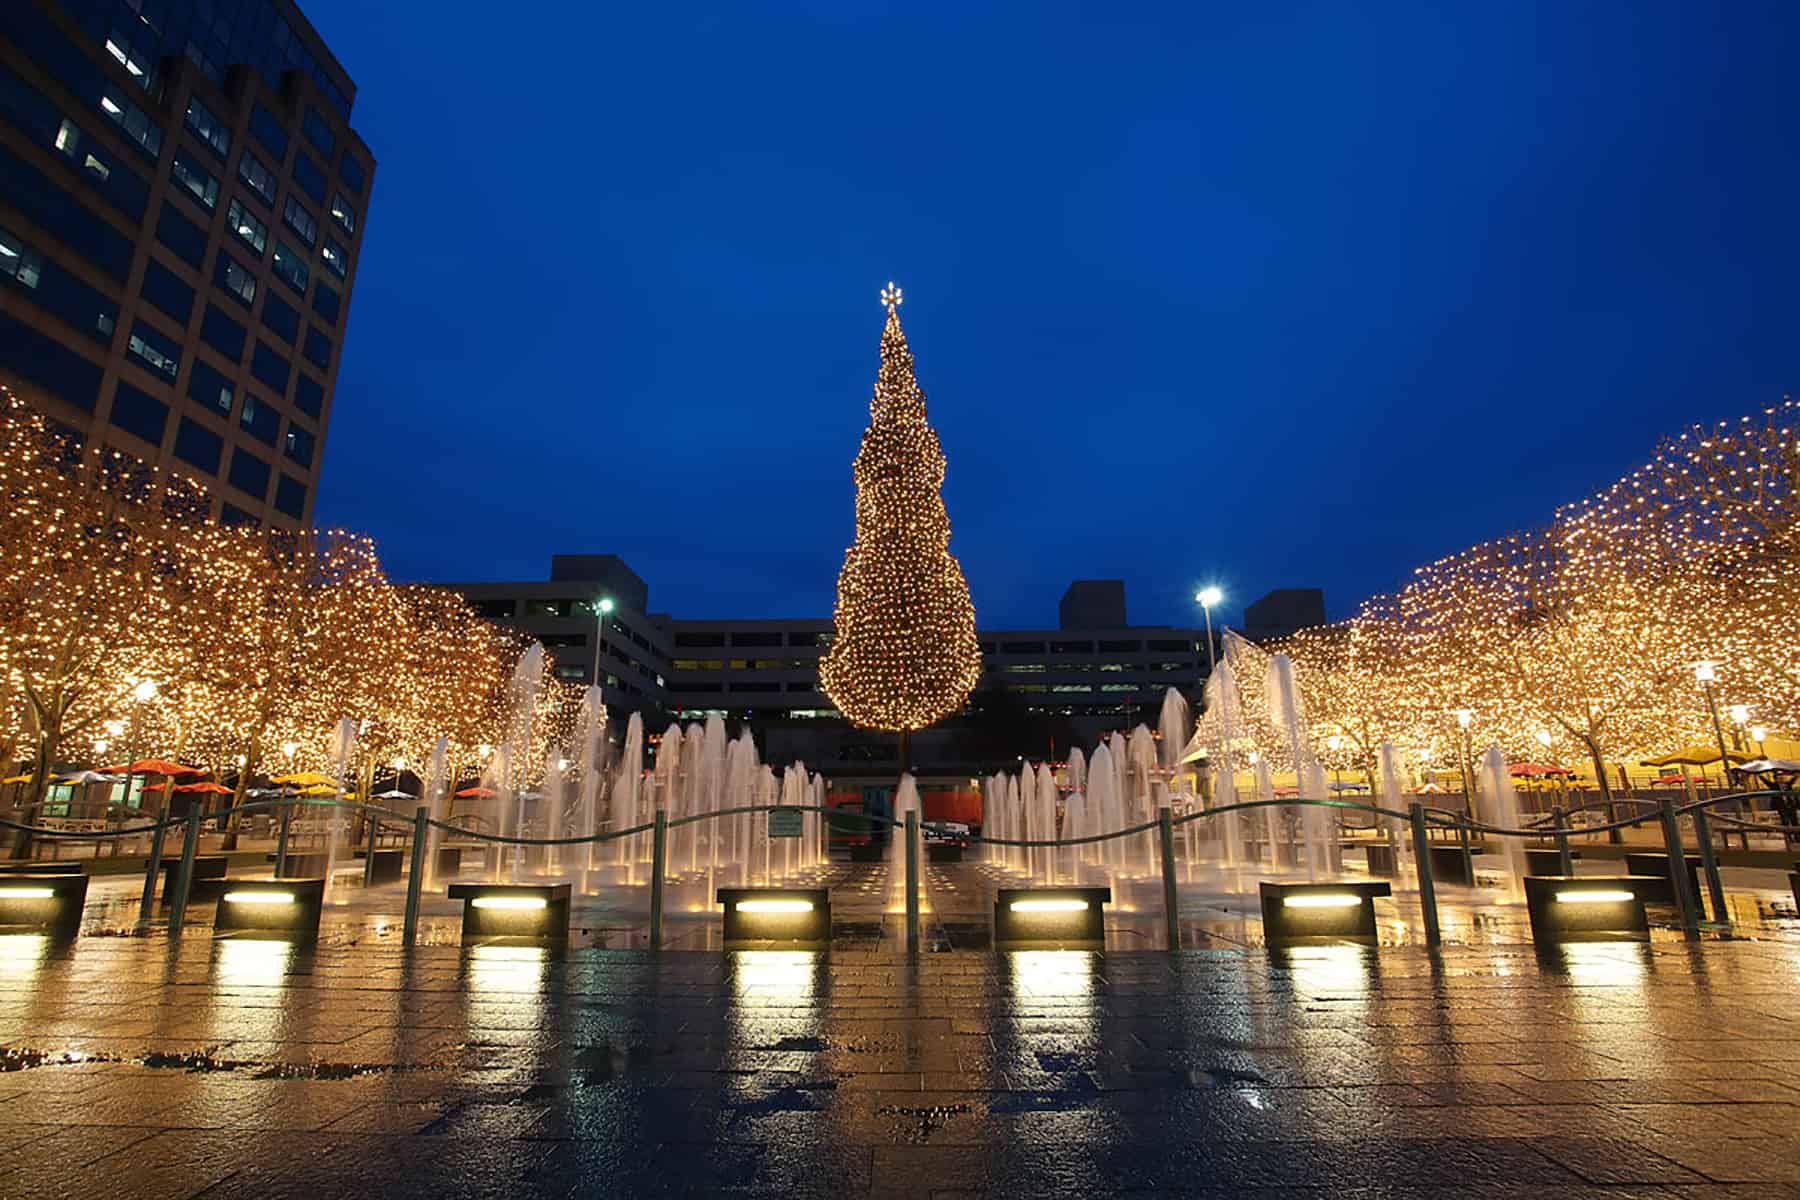 Crown Center Christmas Tree and Fountains